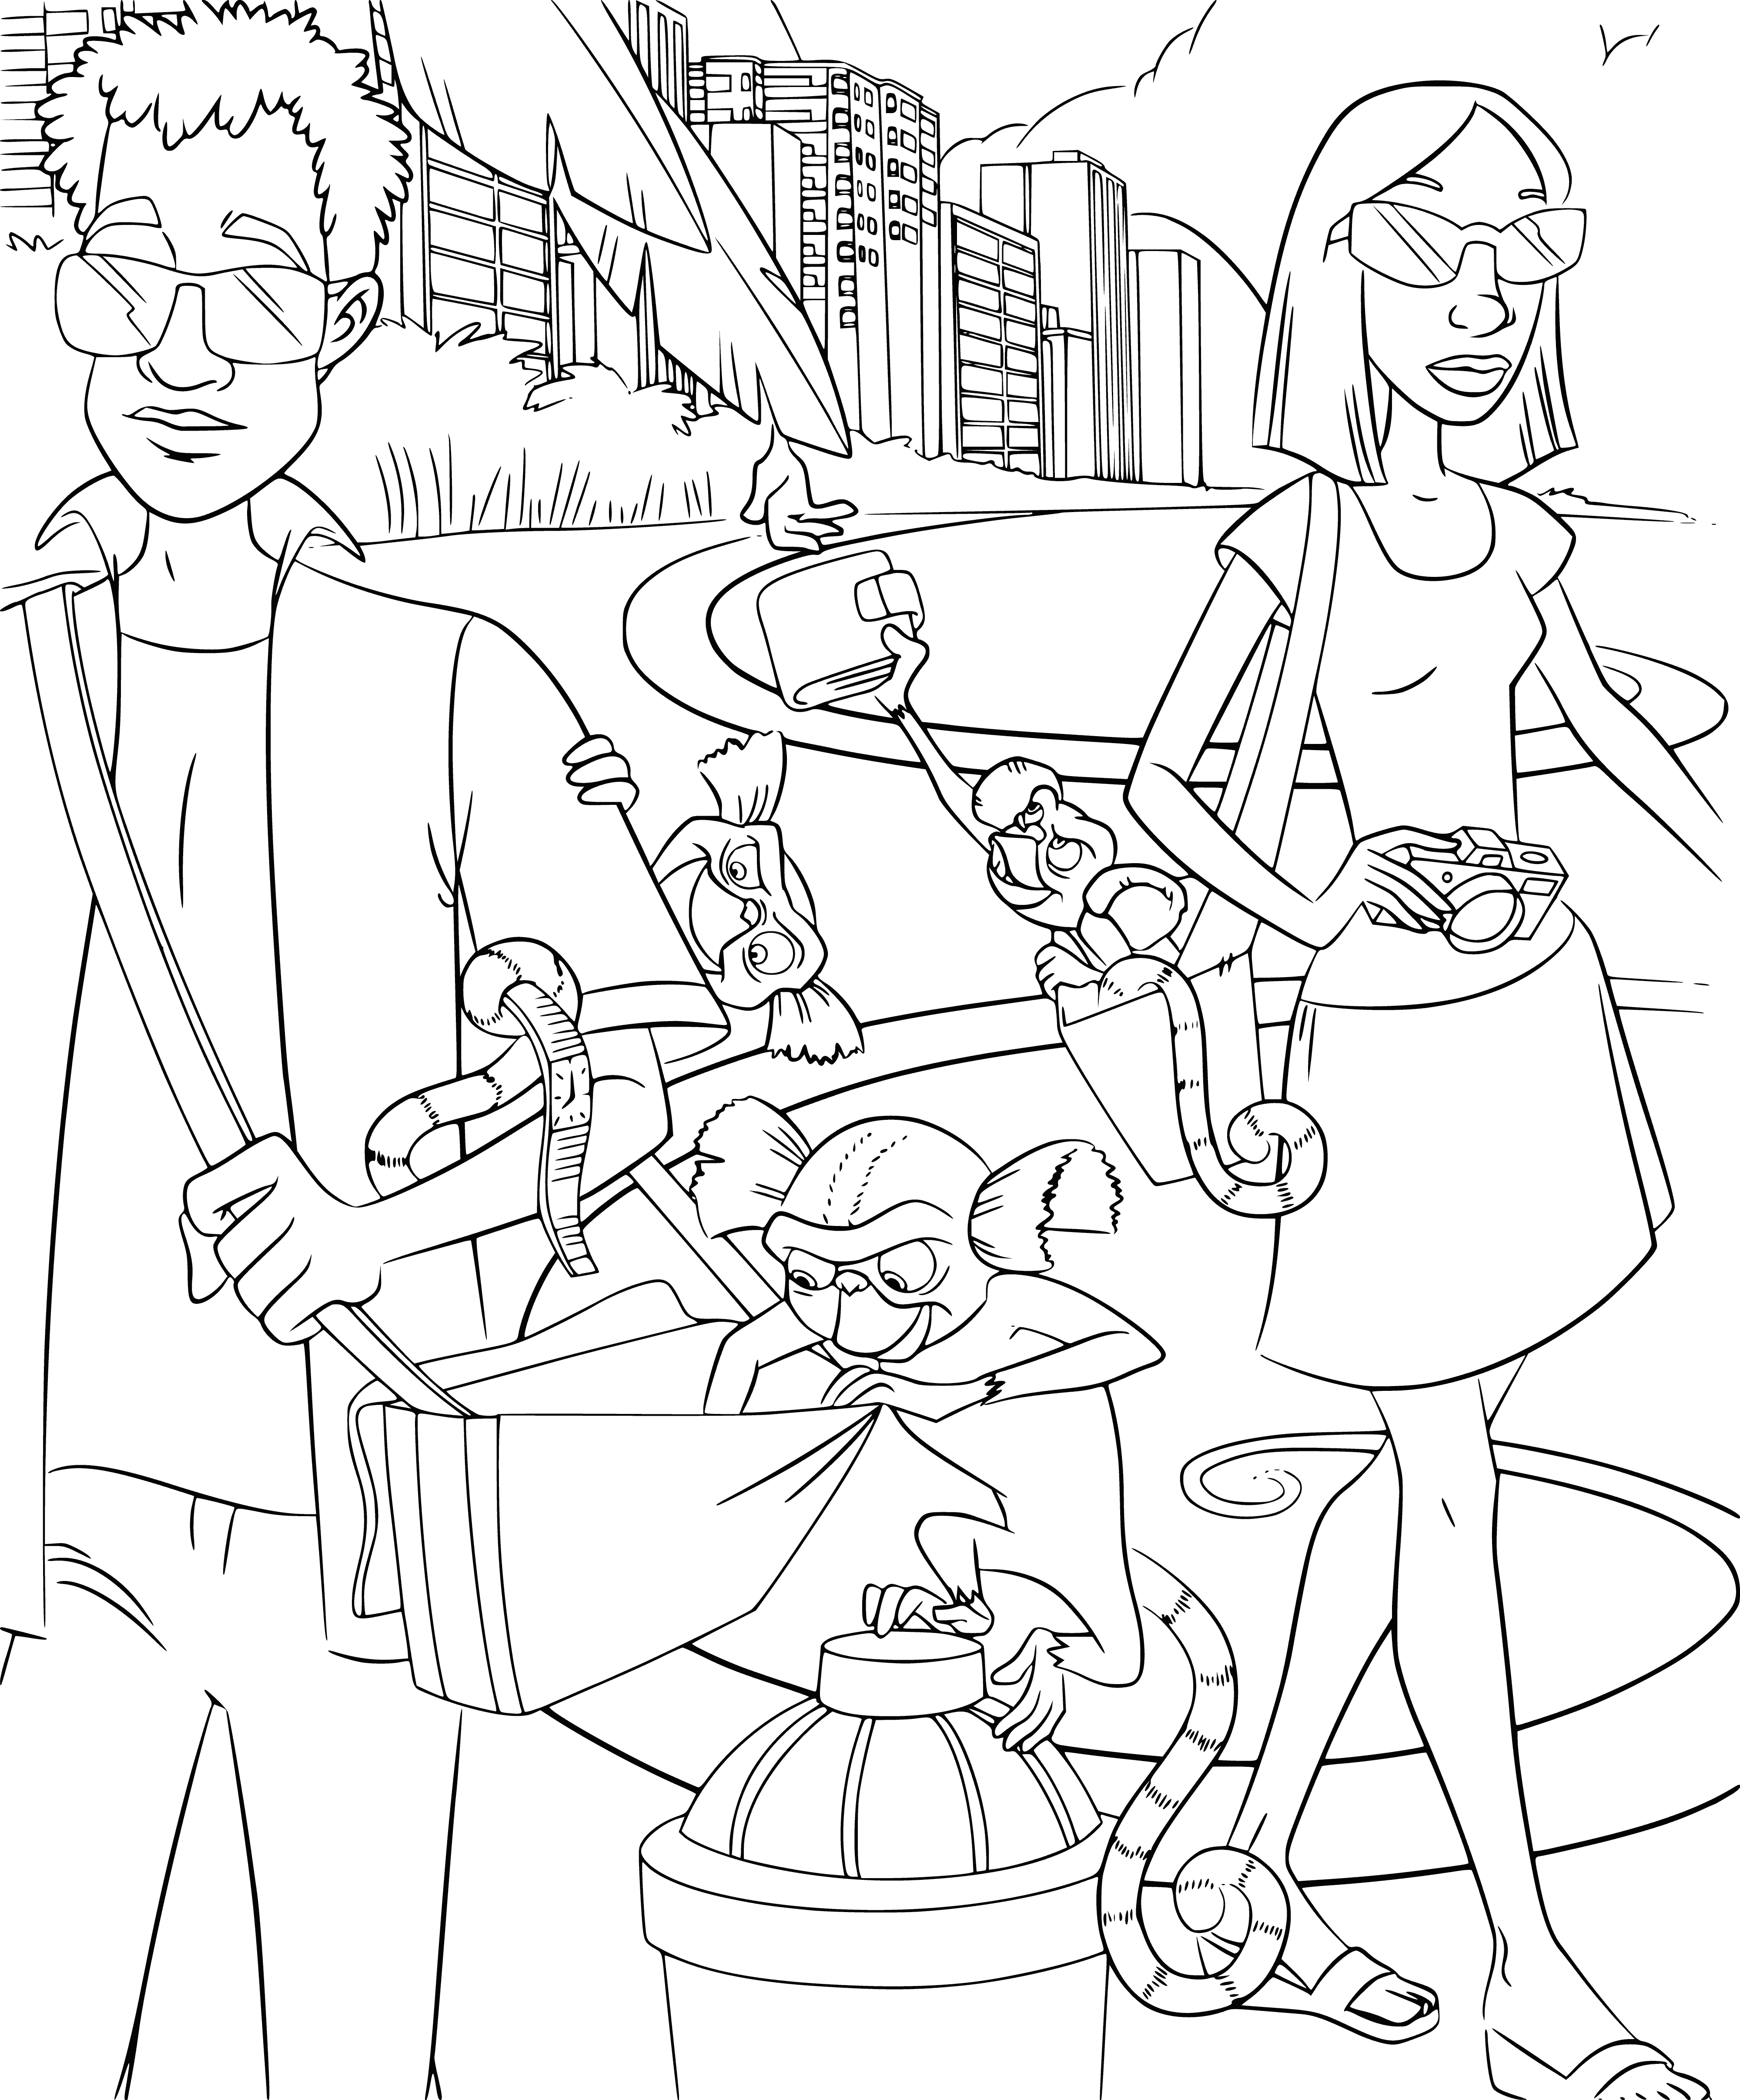 coloring page: Thieves happily share a large stack of cash around a table. Smiles of satisfaction all around.